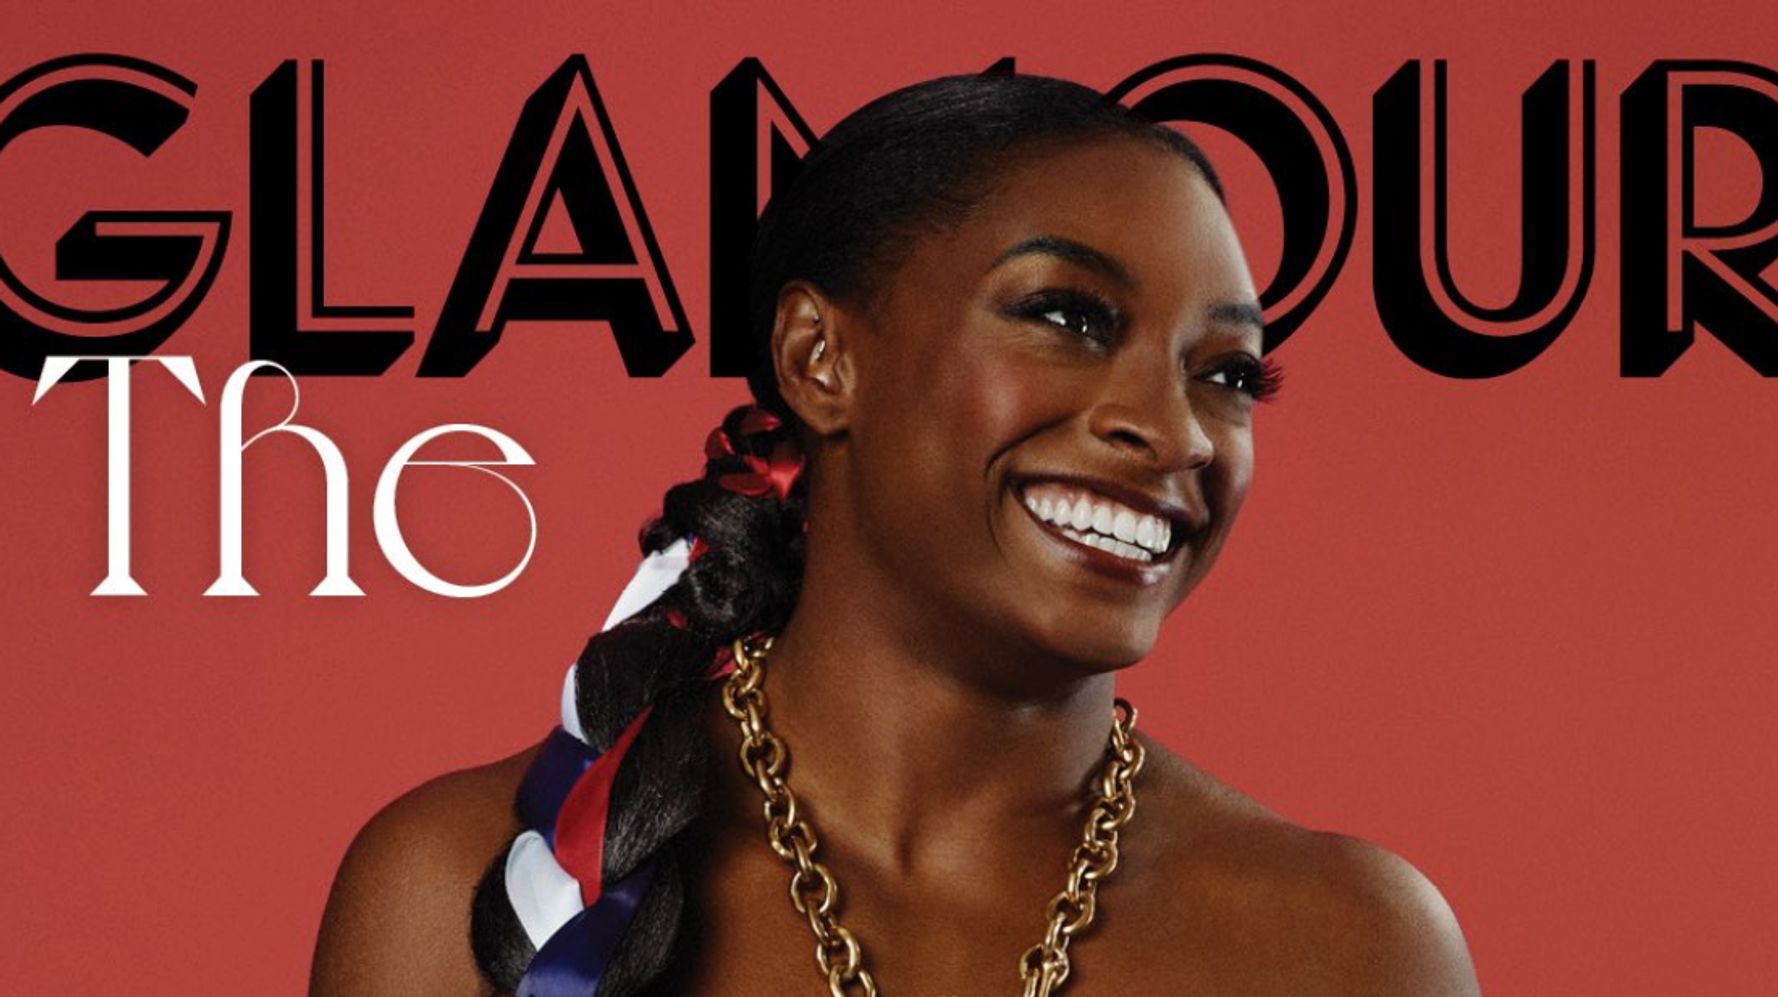 Simone Biles 'Understood The Assignment' In Stunning Glamour Cover Shoot